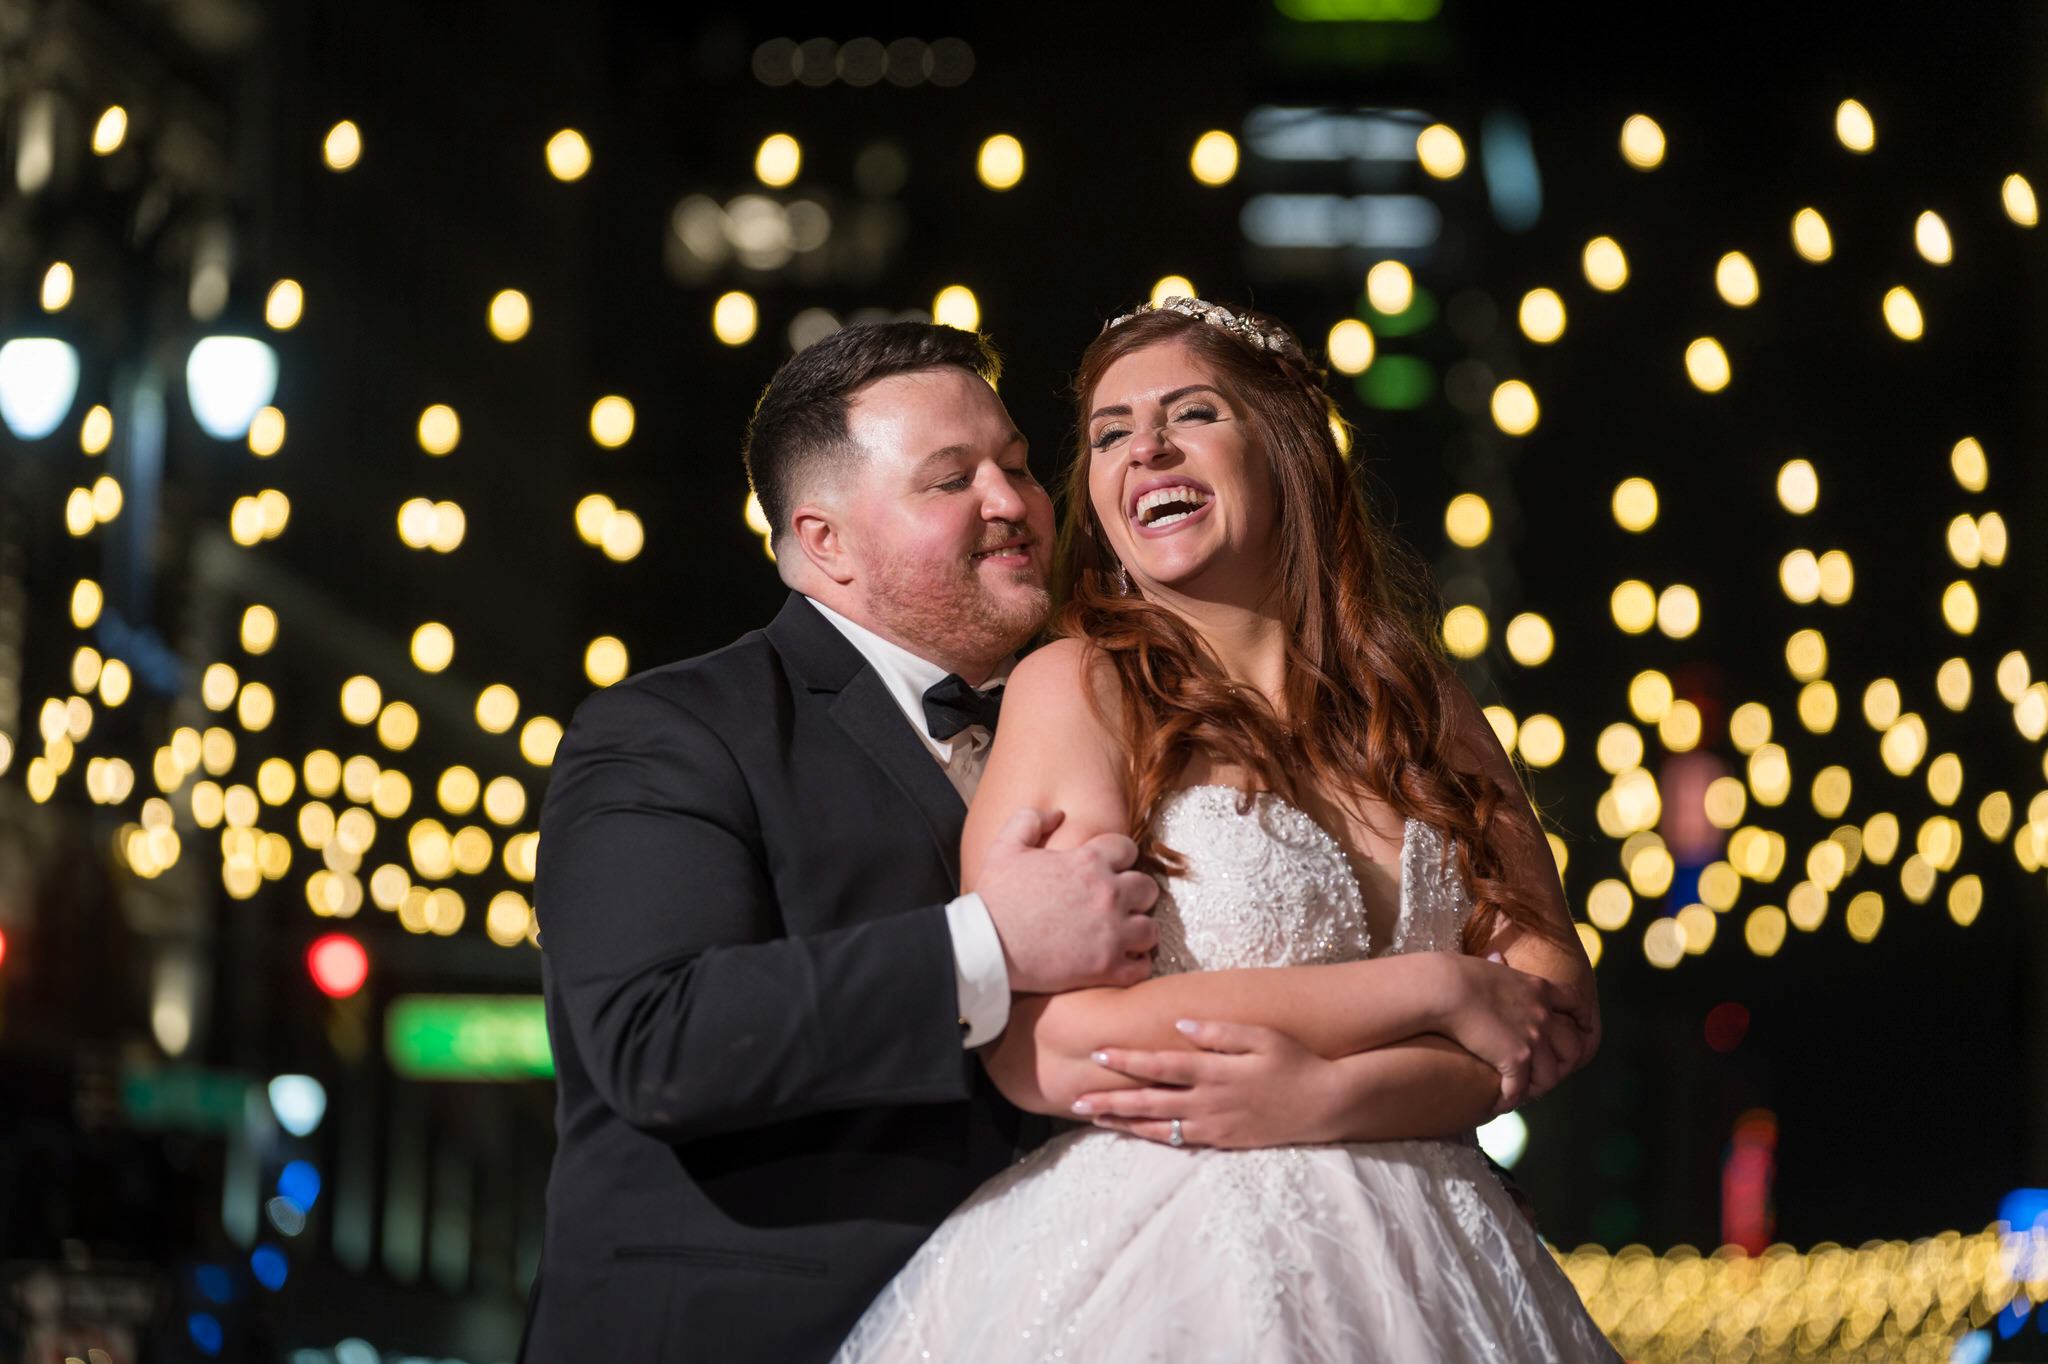 A groom hugs his bride from behind with twinkle lights overhead on Woodward Avenue in Detroit, Michigan.